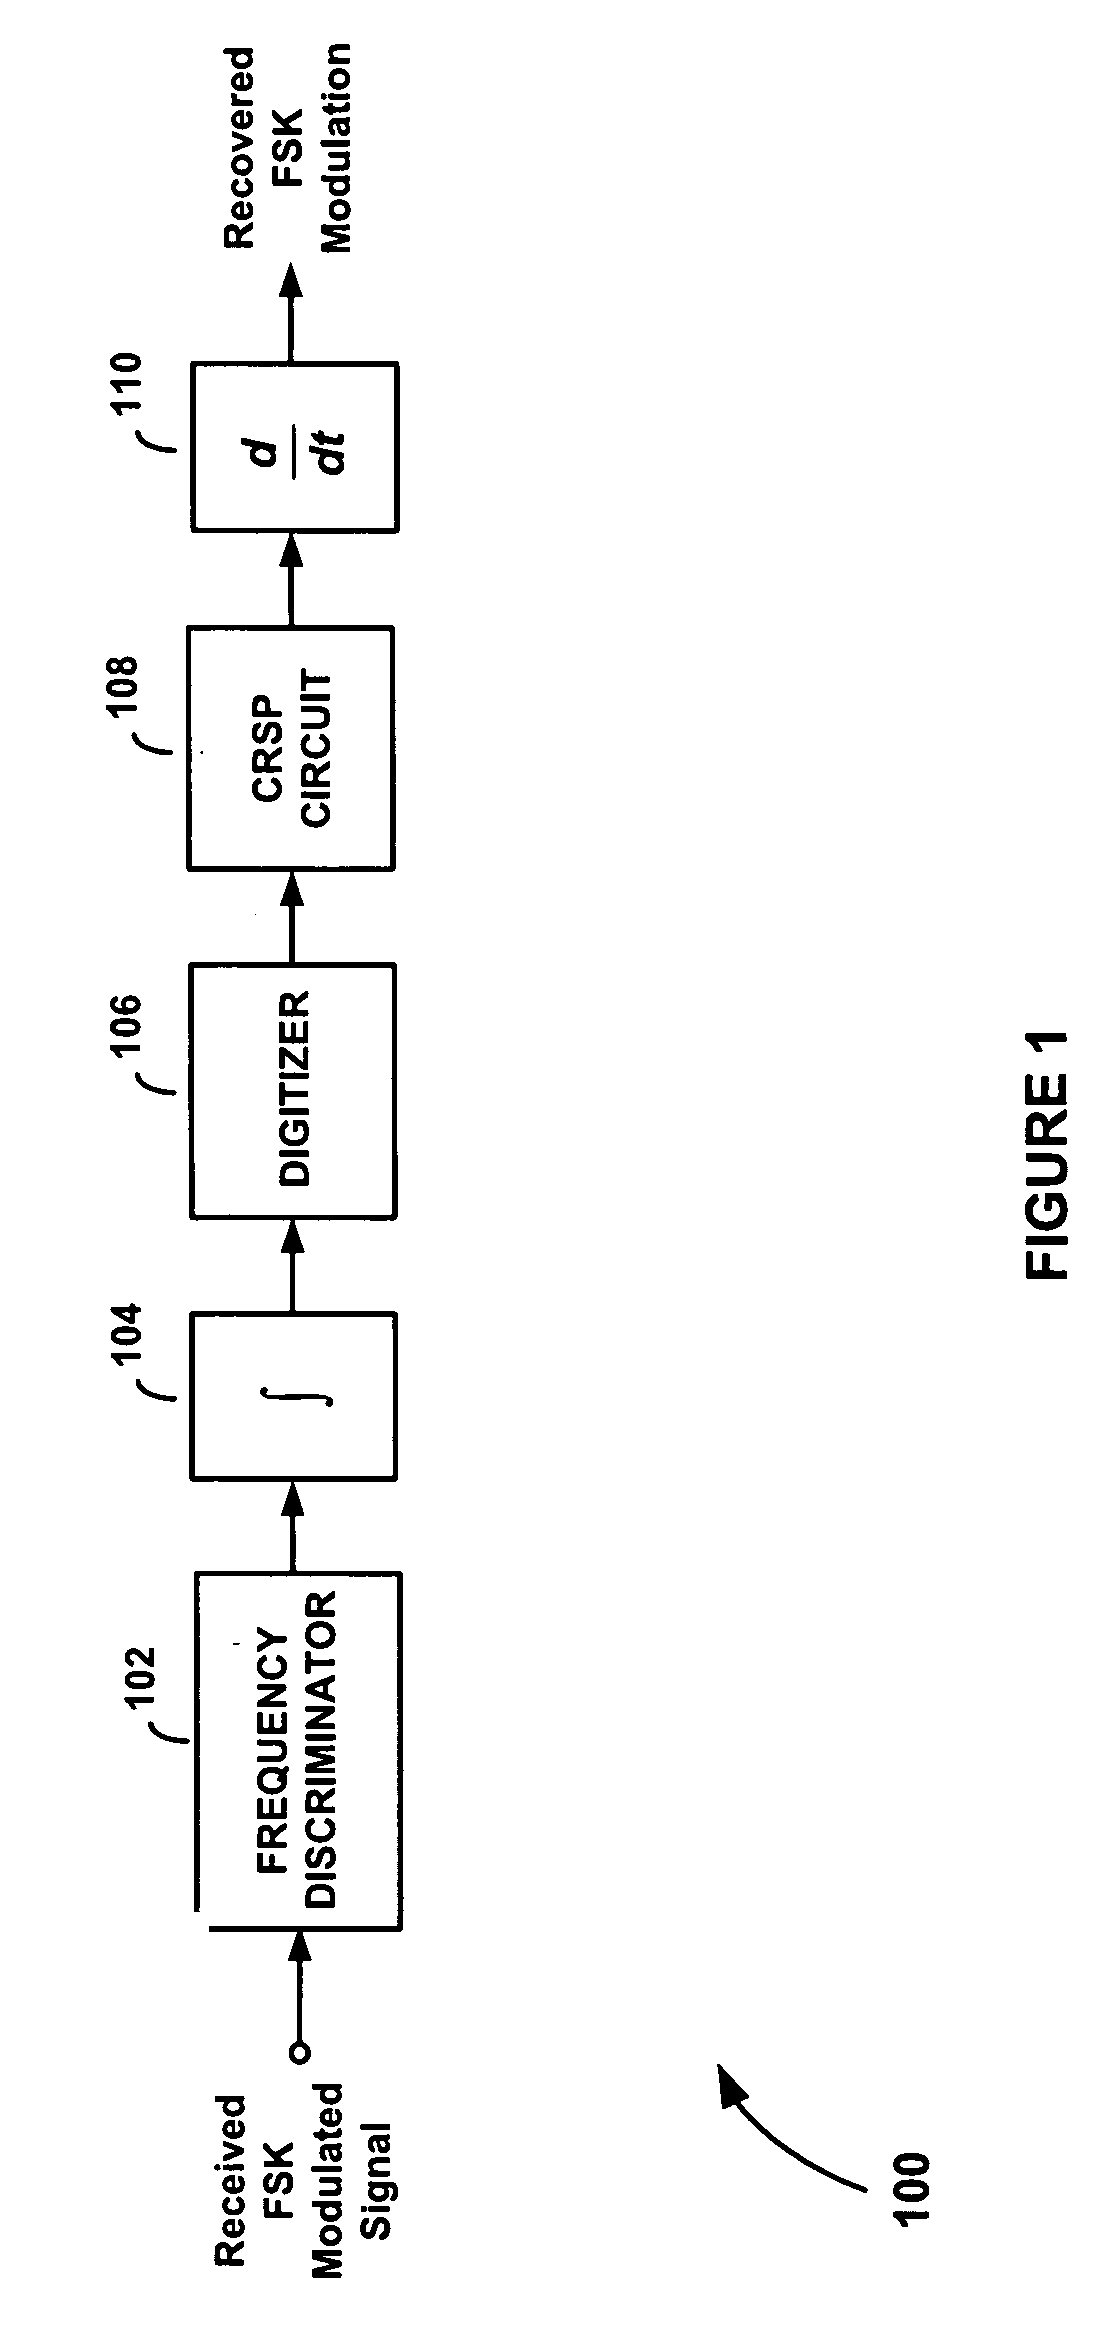 Frequency Demodulation with Threshold Extension